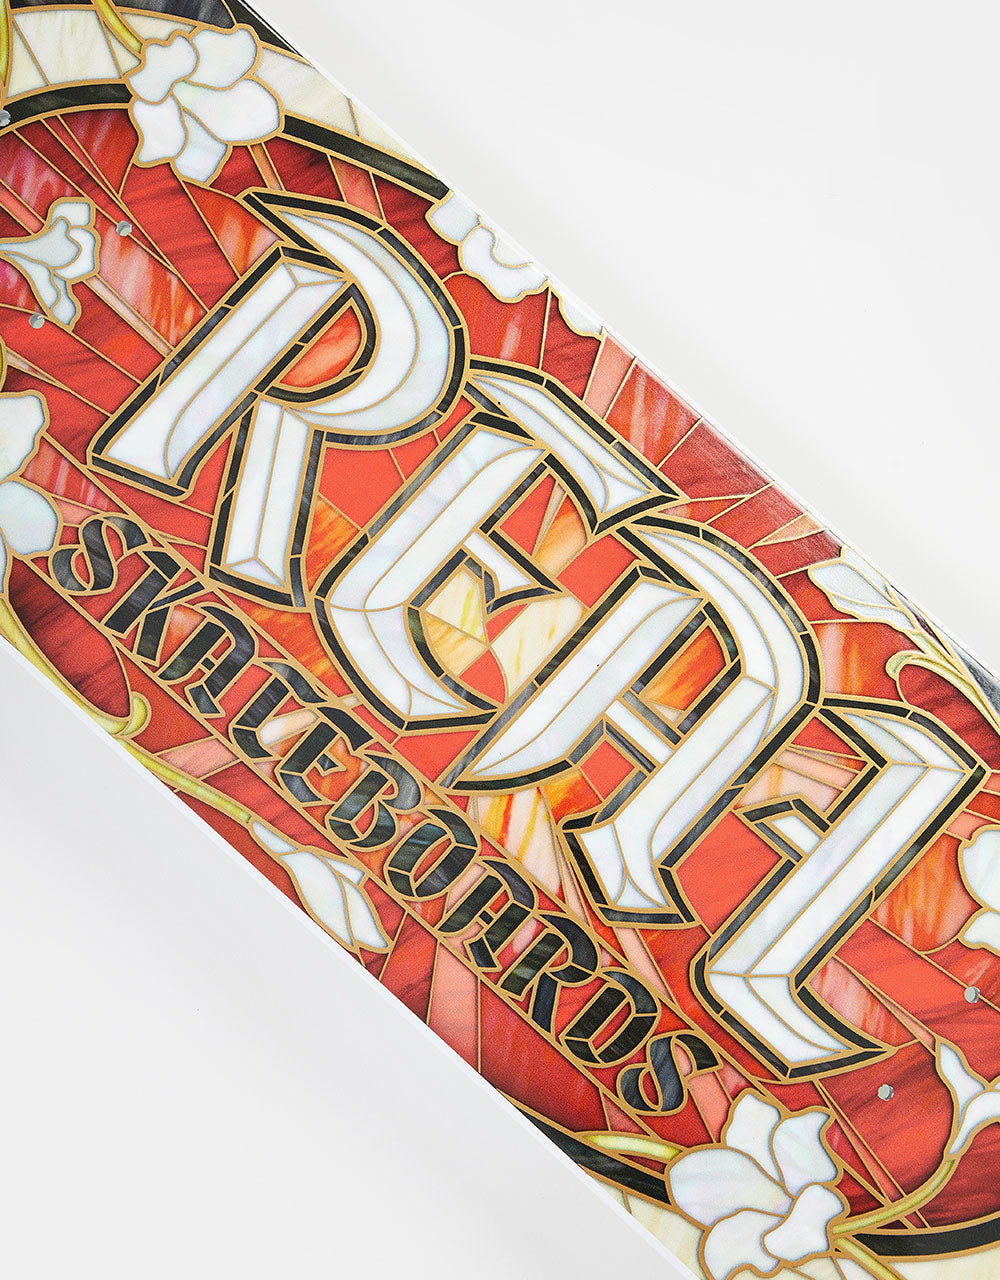 Real Oval Cathedral Skateboard Deck - 8.25"